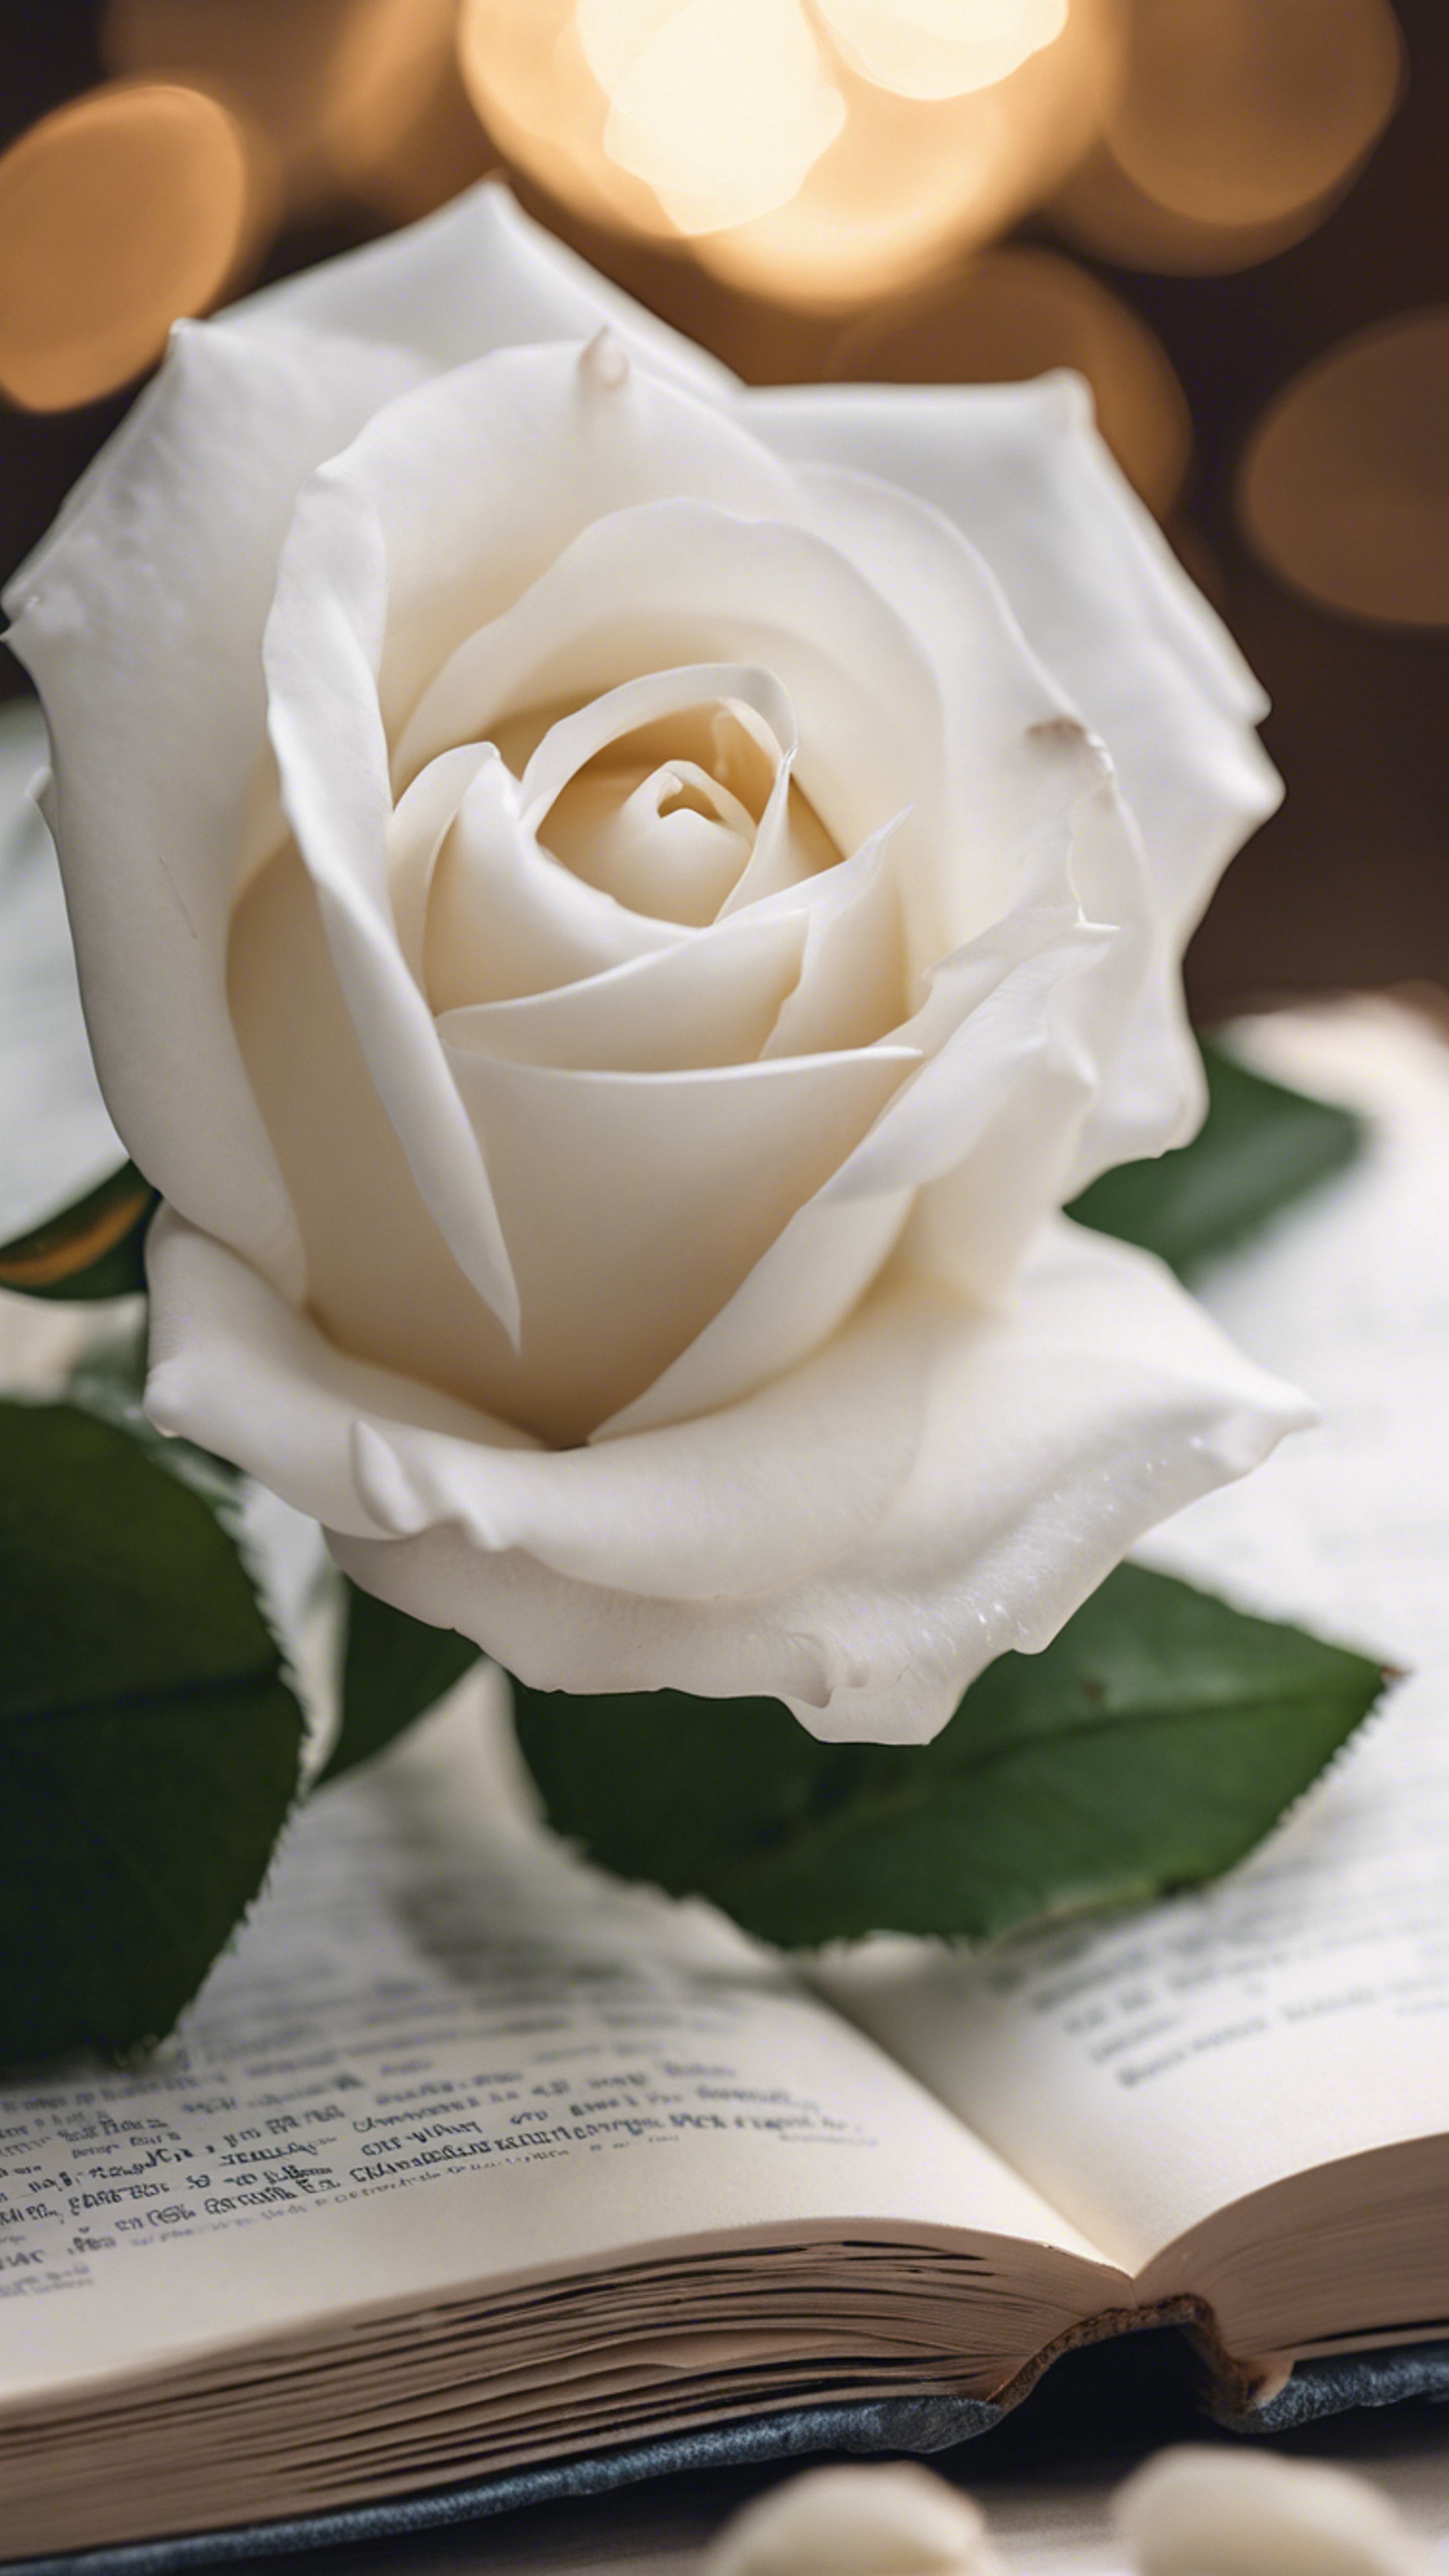 A serene white rose perched on an open hardcover book. Wallpaper[5eeaaa5d95634df1b3fb]